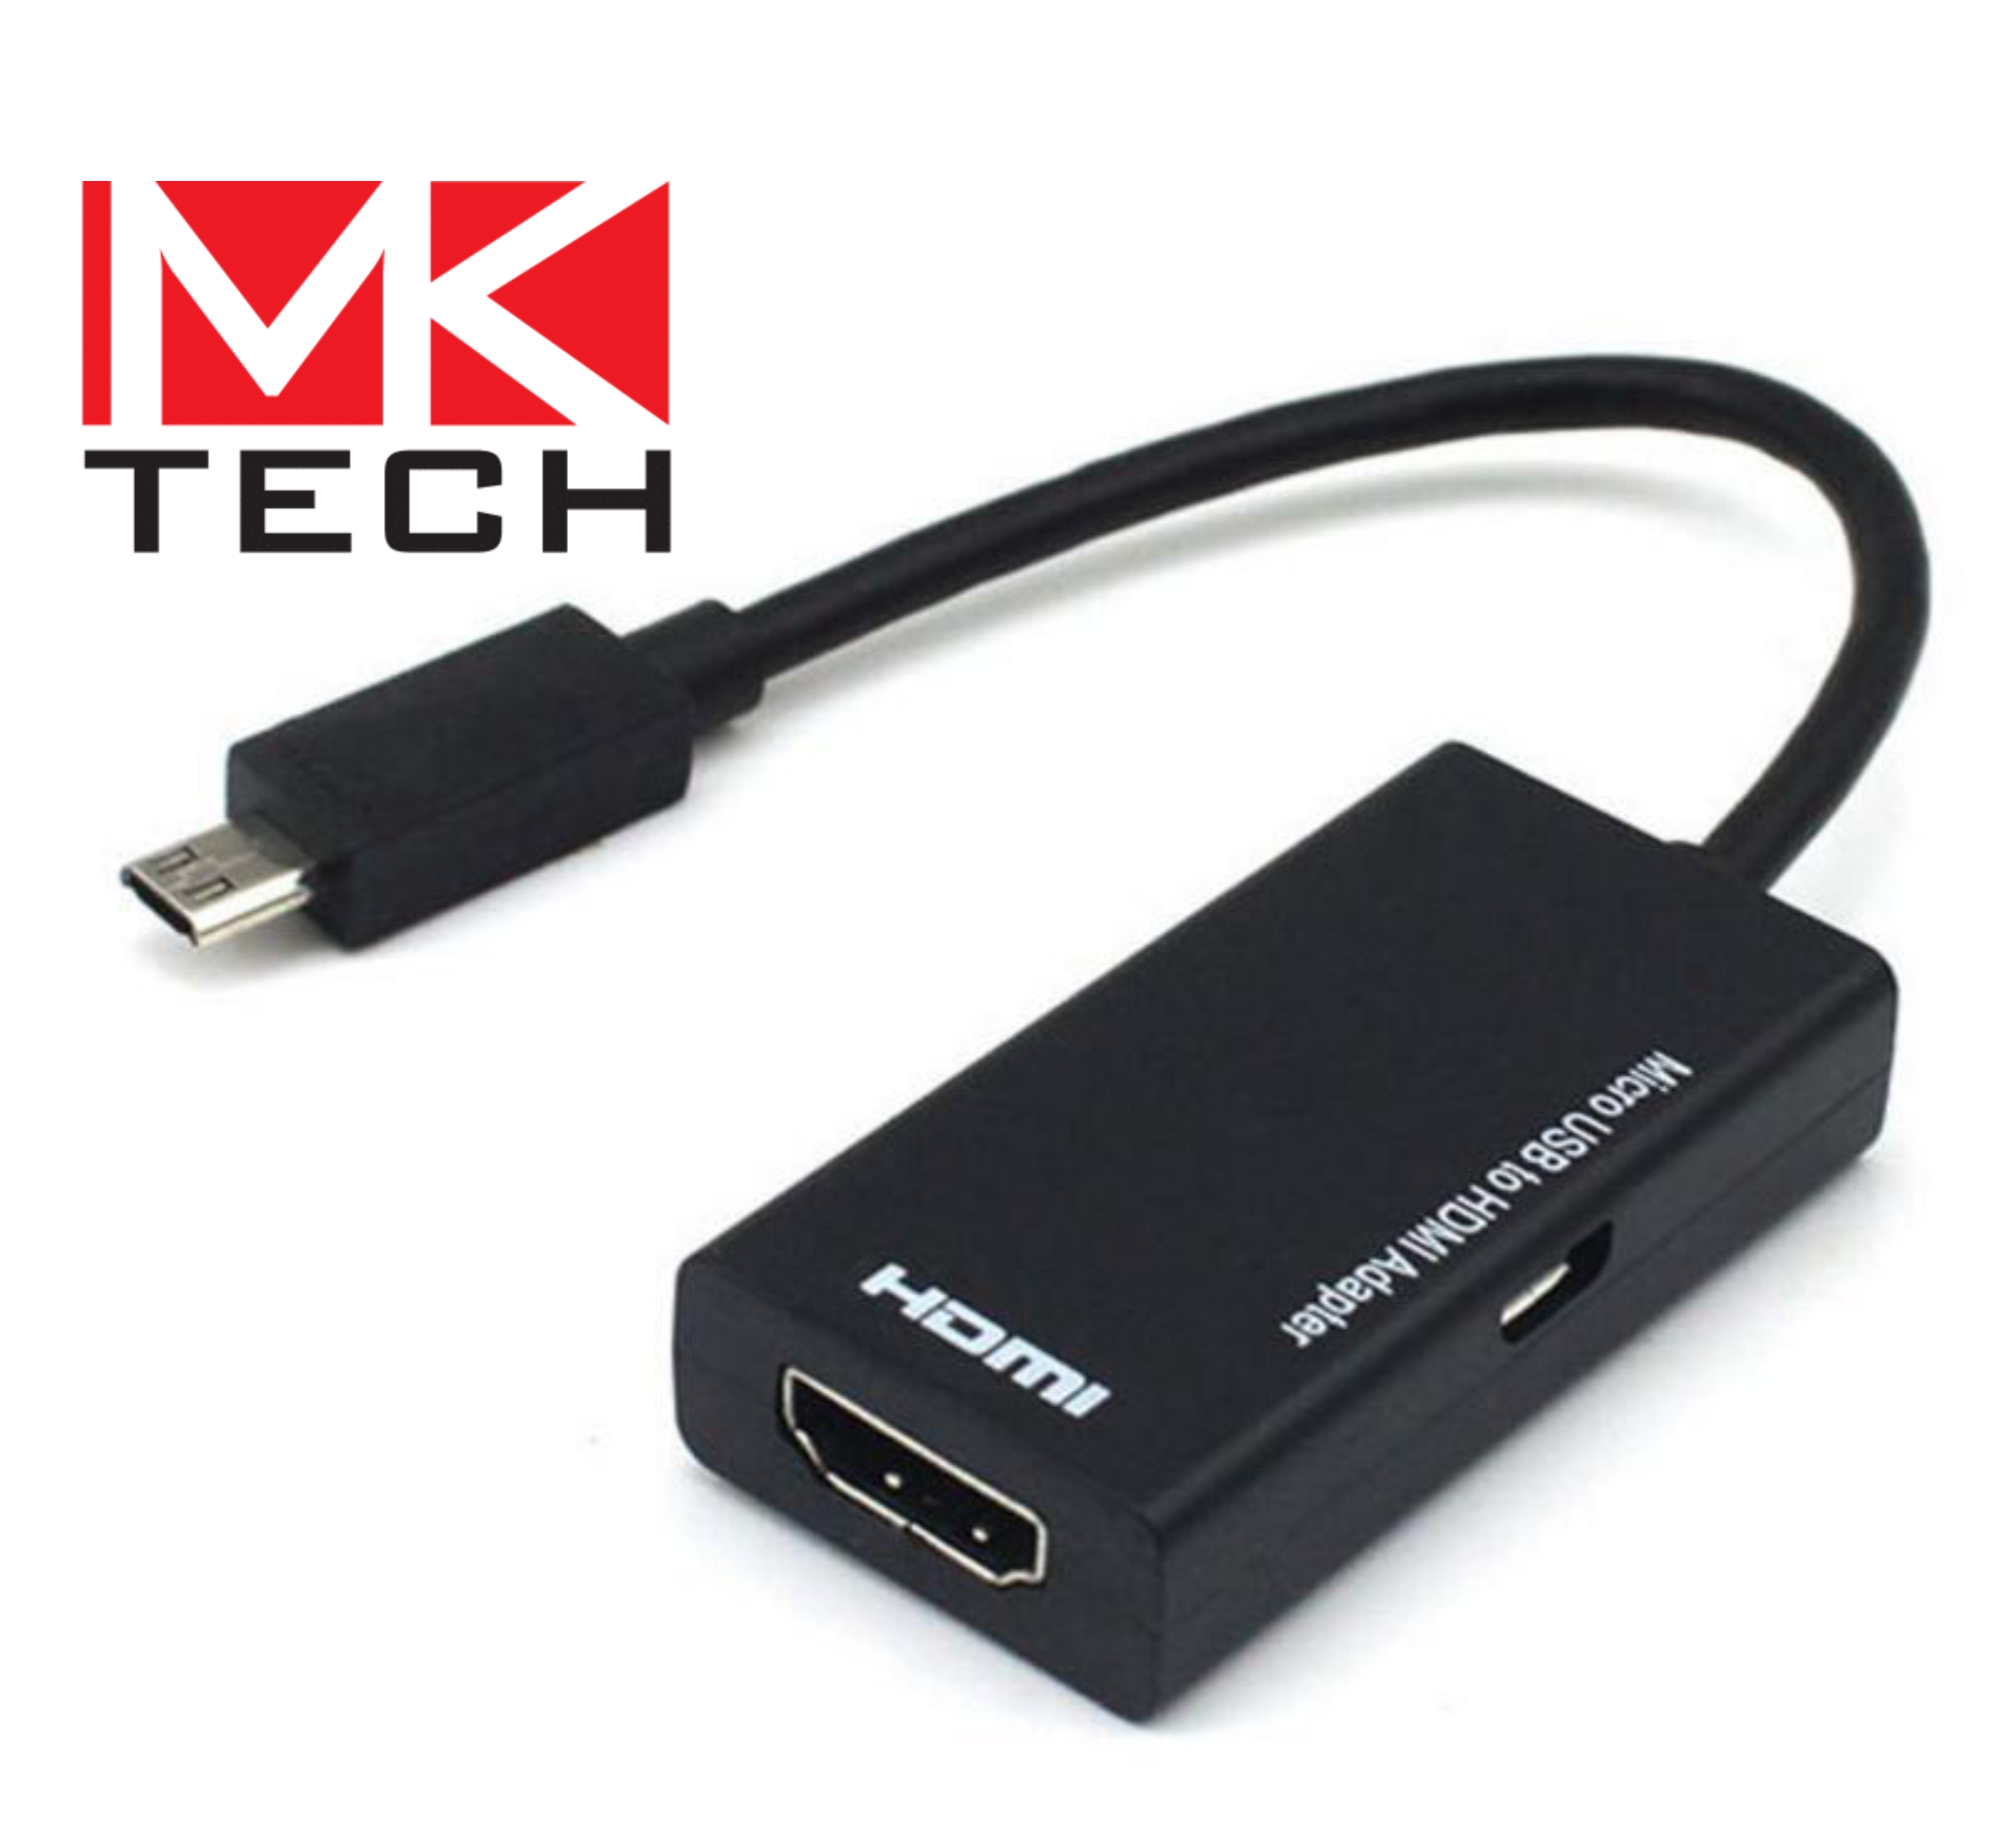 MHL adapter Micro USB to HDMI MKTECH